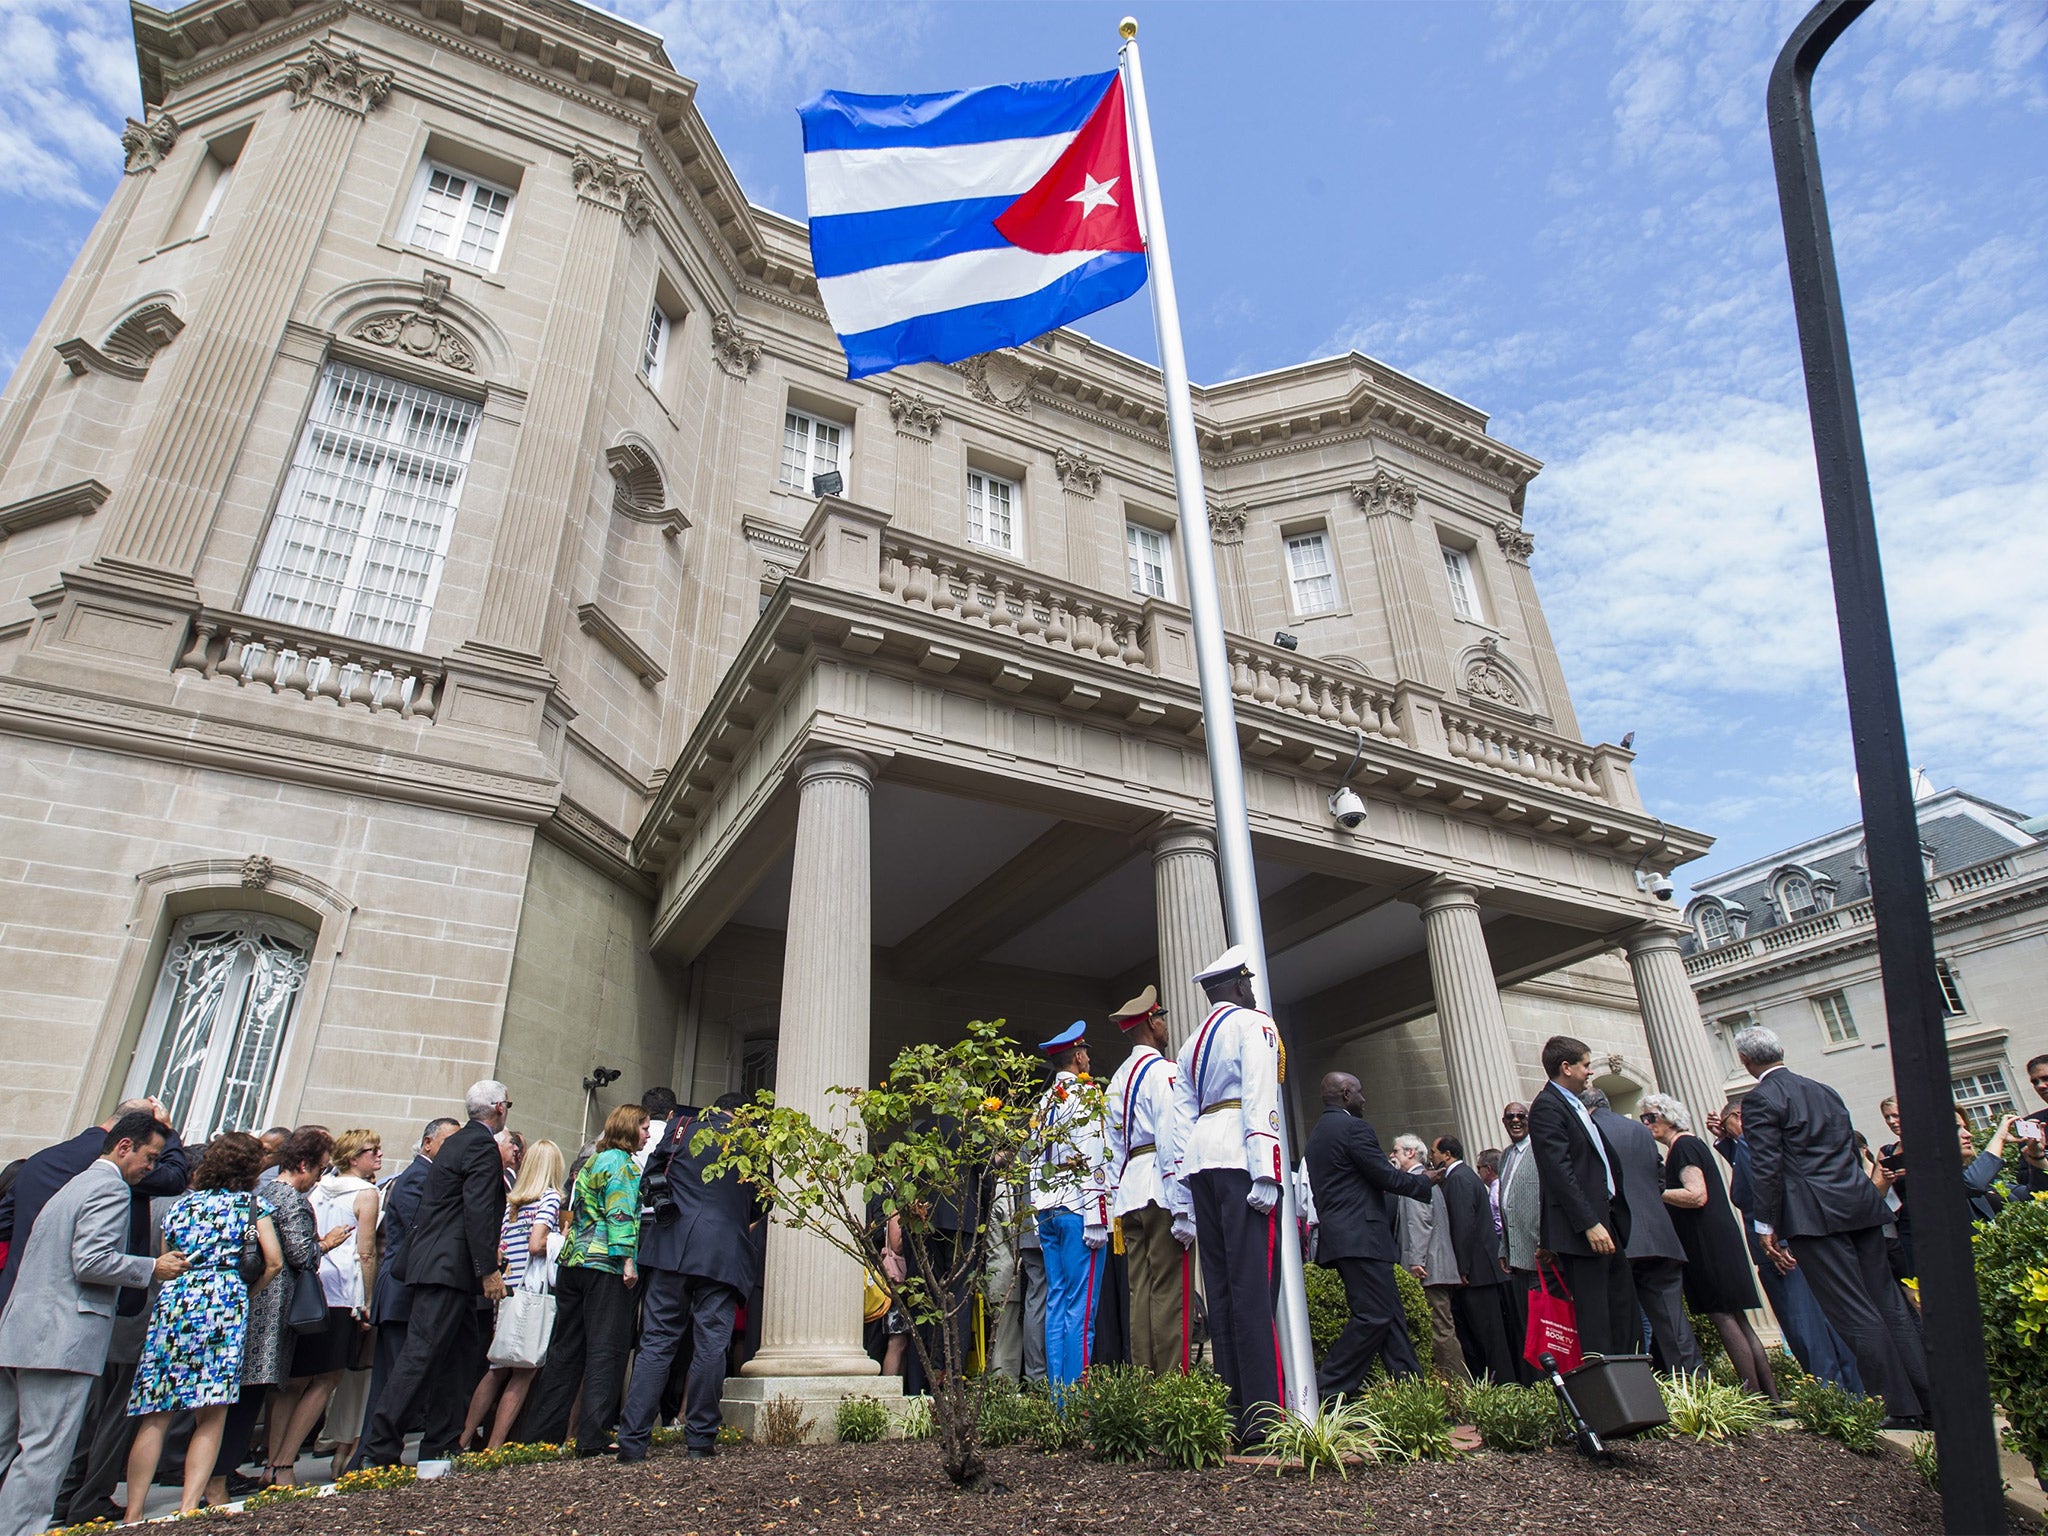 Cuba’s flag was raised over its embassy in Washington for the first time in 54 years on Monday